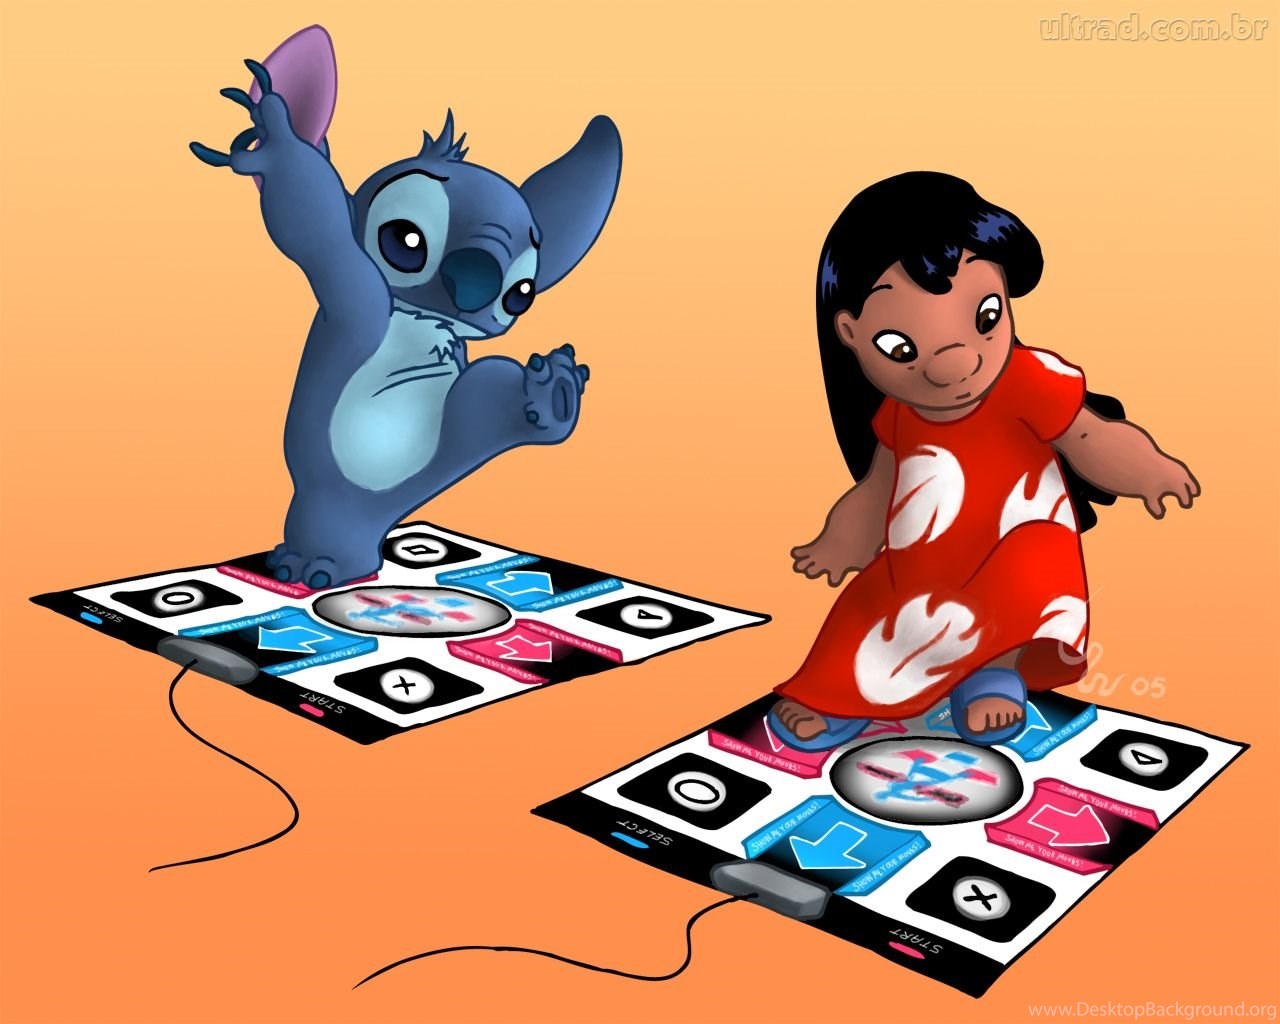 Disney  Every Halloween is out of this world with Lilo  Stitch  Facebook